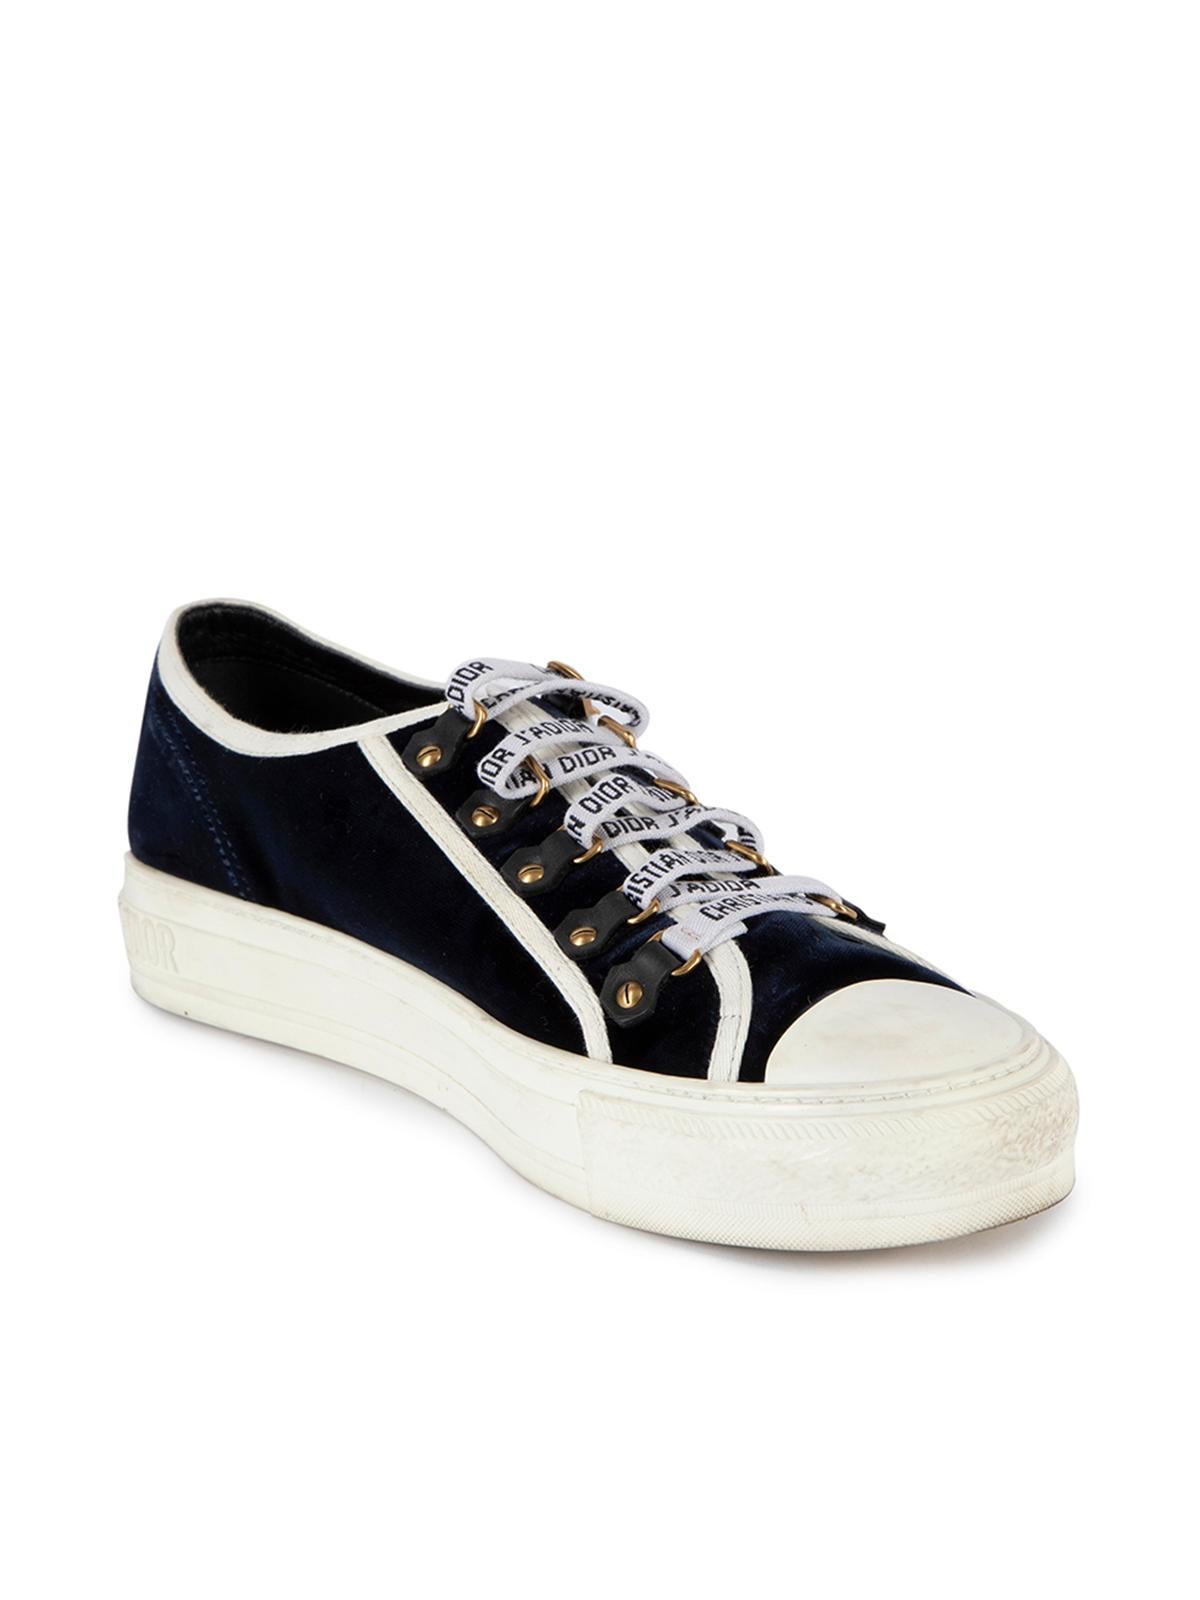 CONDITION is Very good. Minimal wear to trainers is evident. Minimal wear/marks to the toe point and midsole on this used Christian Dior designer resale item. Details Black and white Velvet Lace up Low top leather accents Gold tone hardware Made in